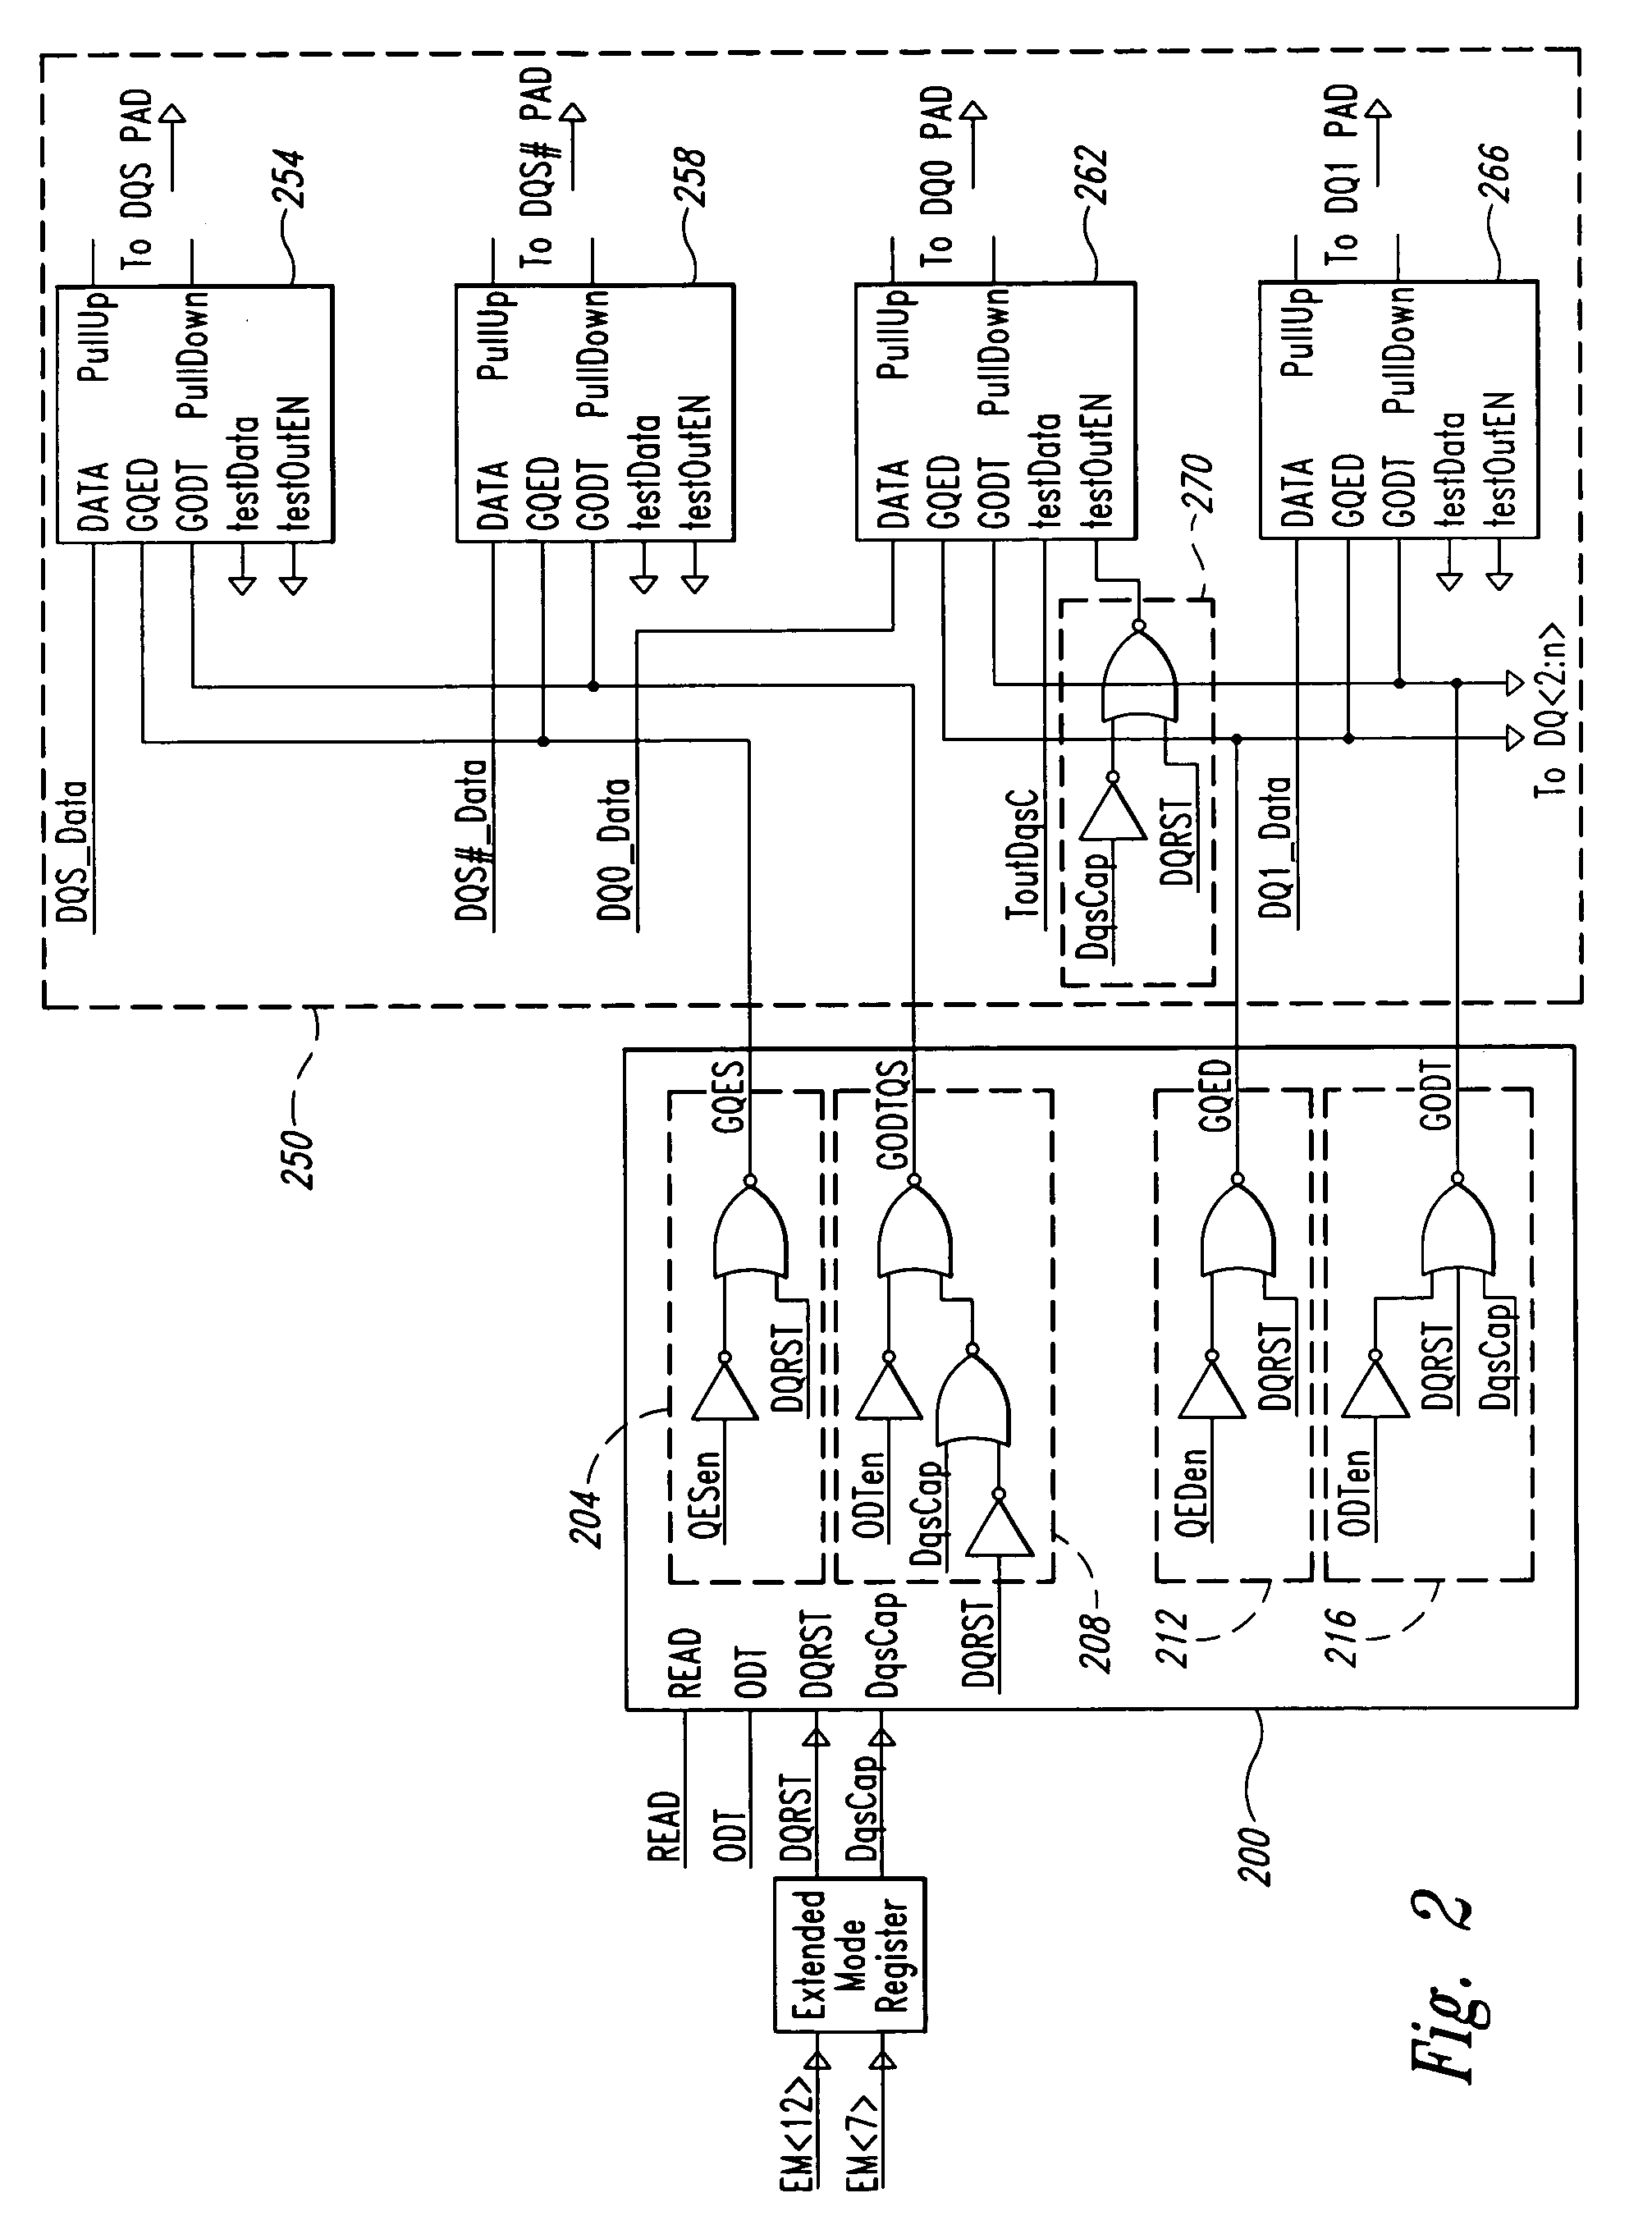 Apparatus and method for independent control of on-die termination for output buffers of a memory device